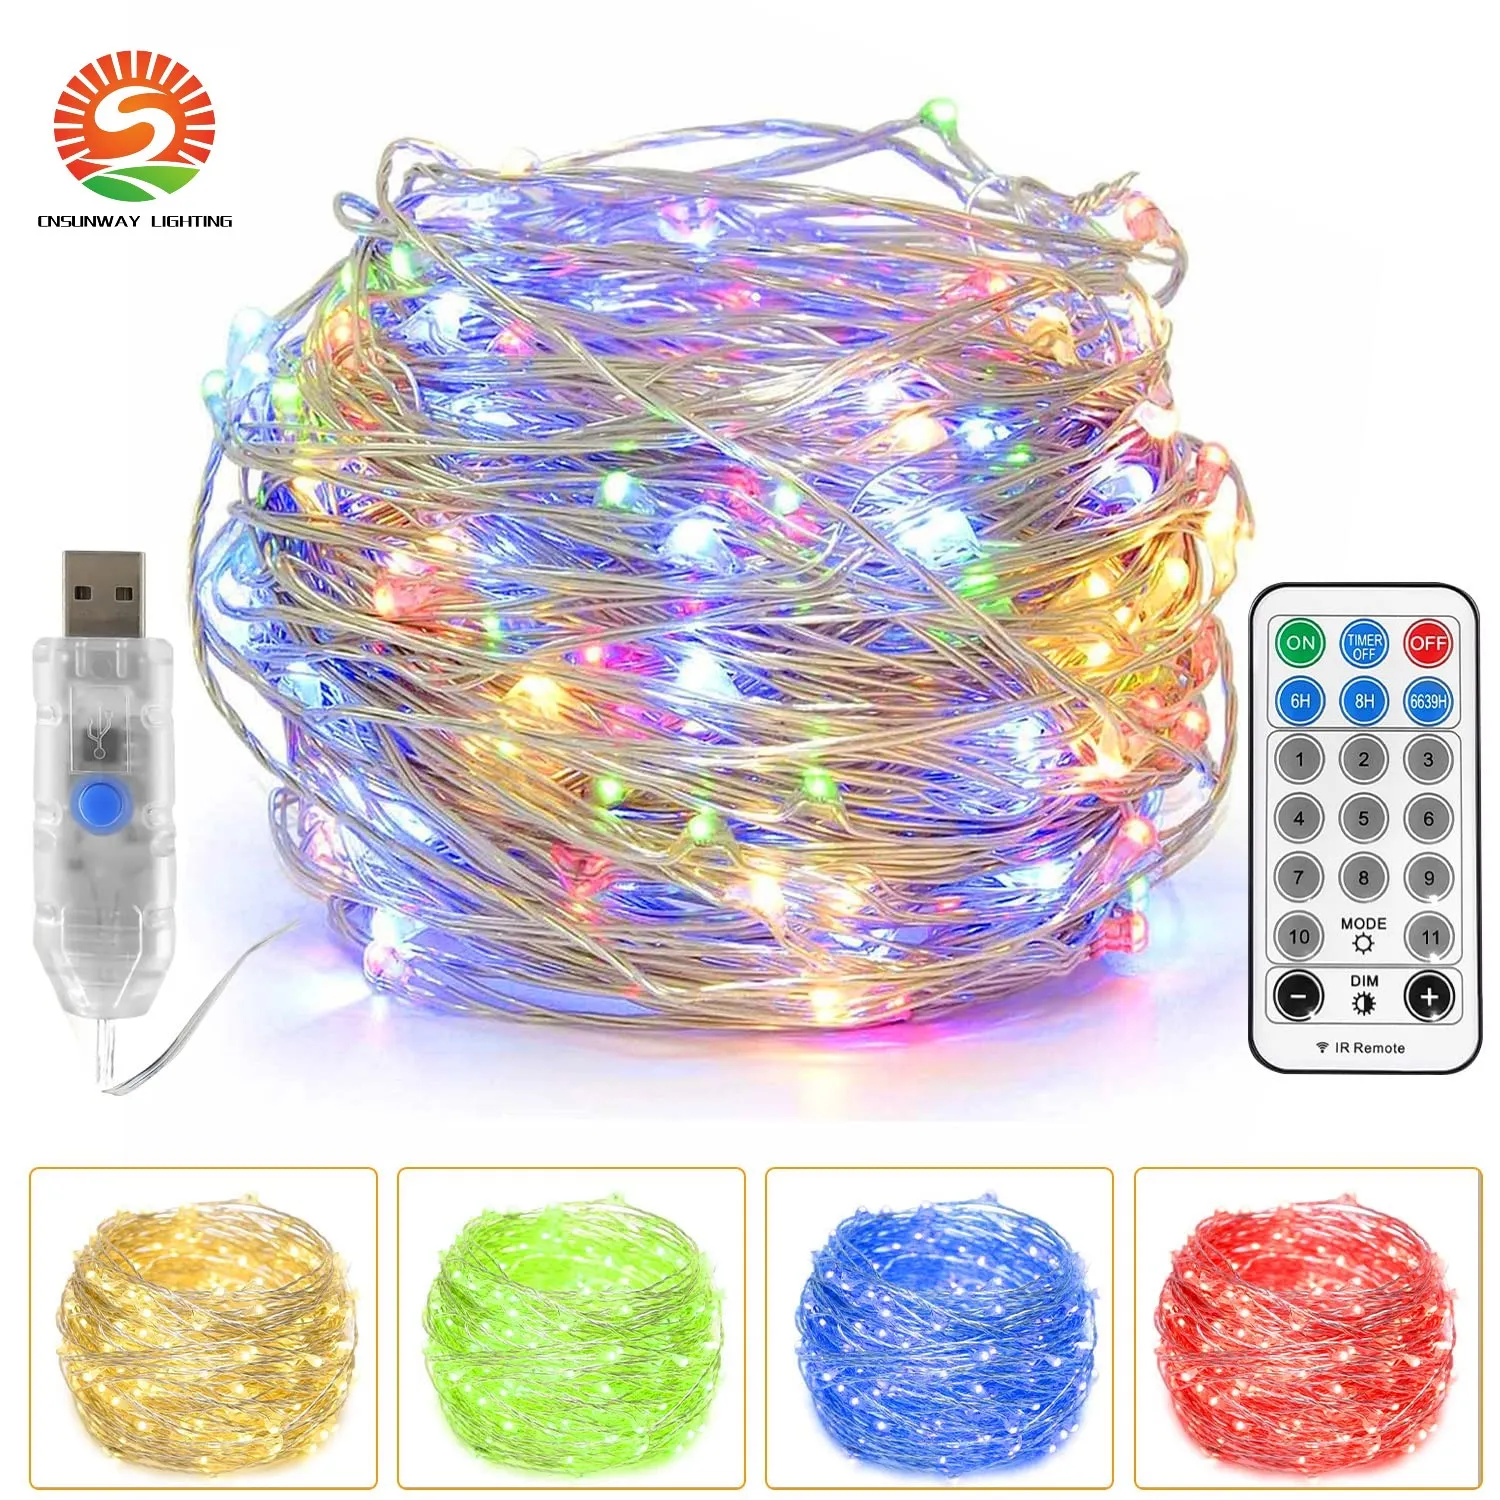 10M 100 LED Fairy Lights USB String Lights 11 Modes Firefly Light Dimming Timing Memory Function for Outdoor Party Christmas Home Decorations RGB & Warm White